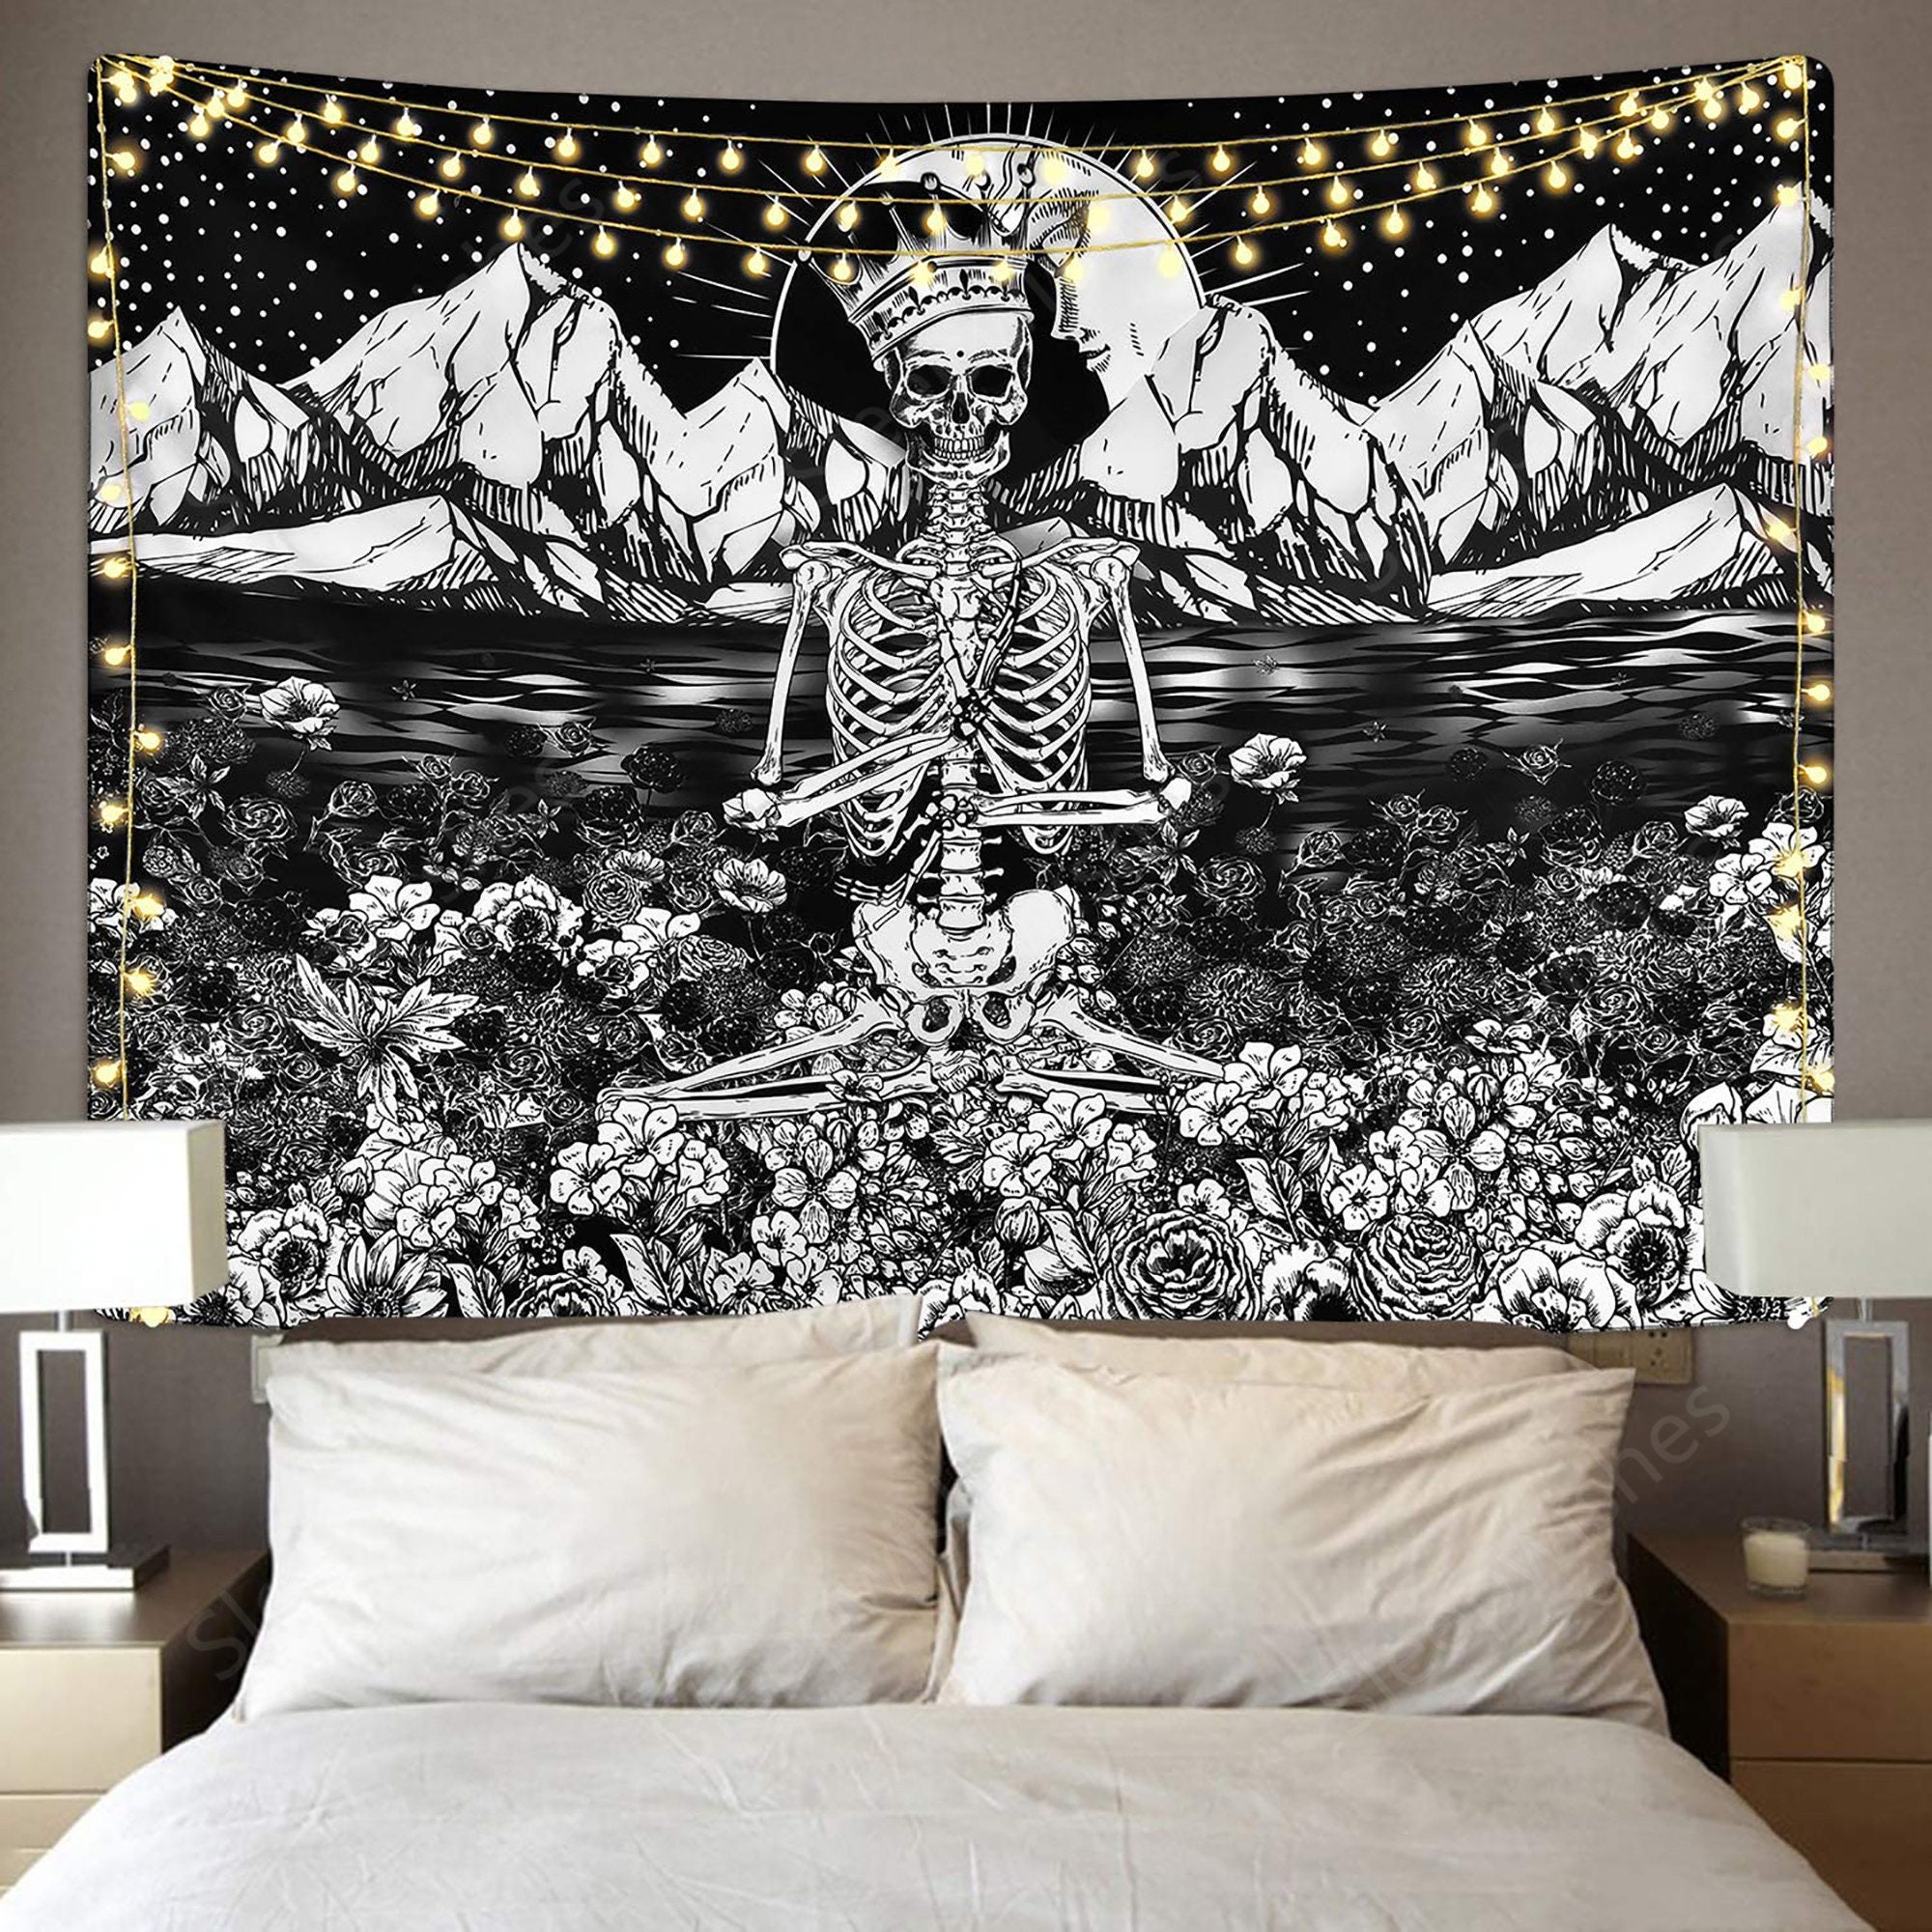 Meditation Astronaut Skeleton Tapestry Wall Hanging Hippie Tapestry Home Decor 